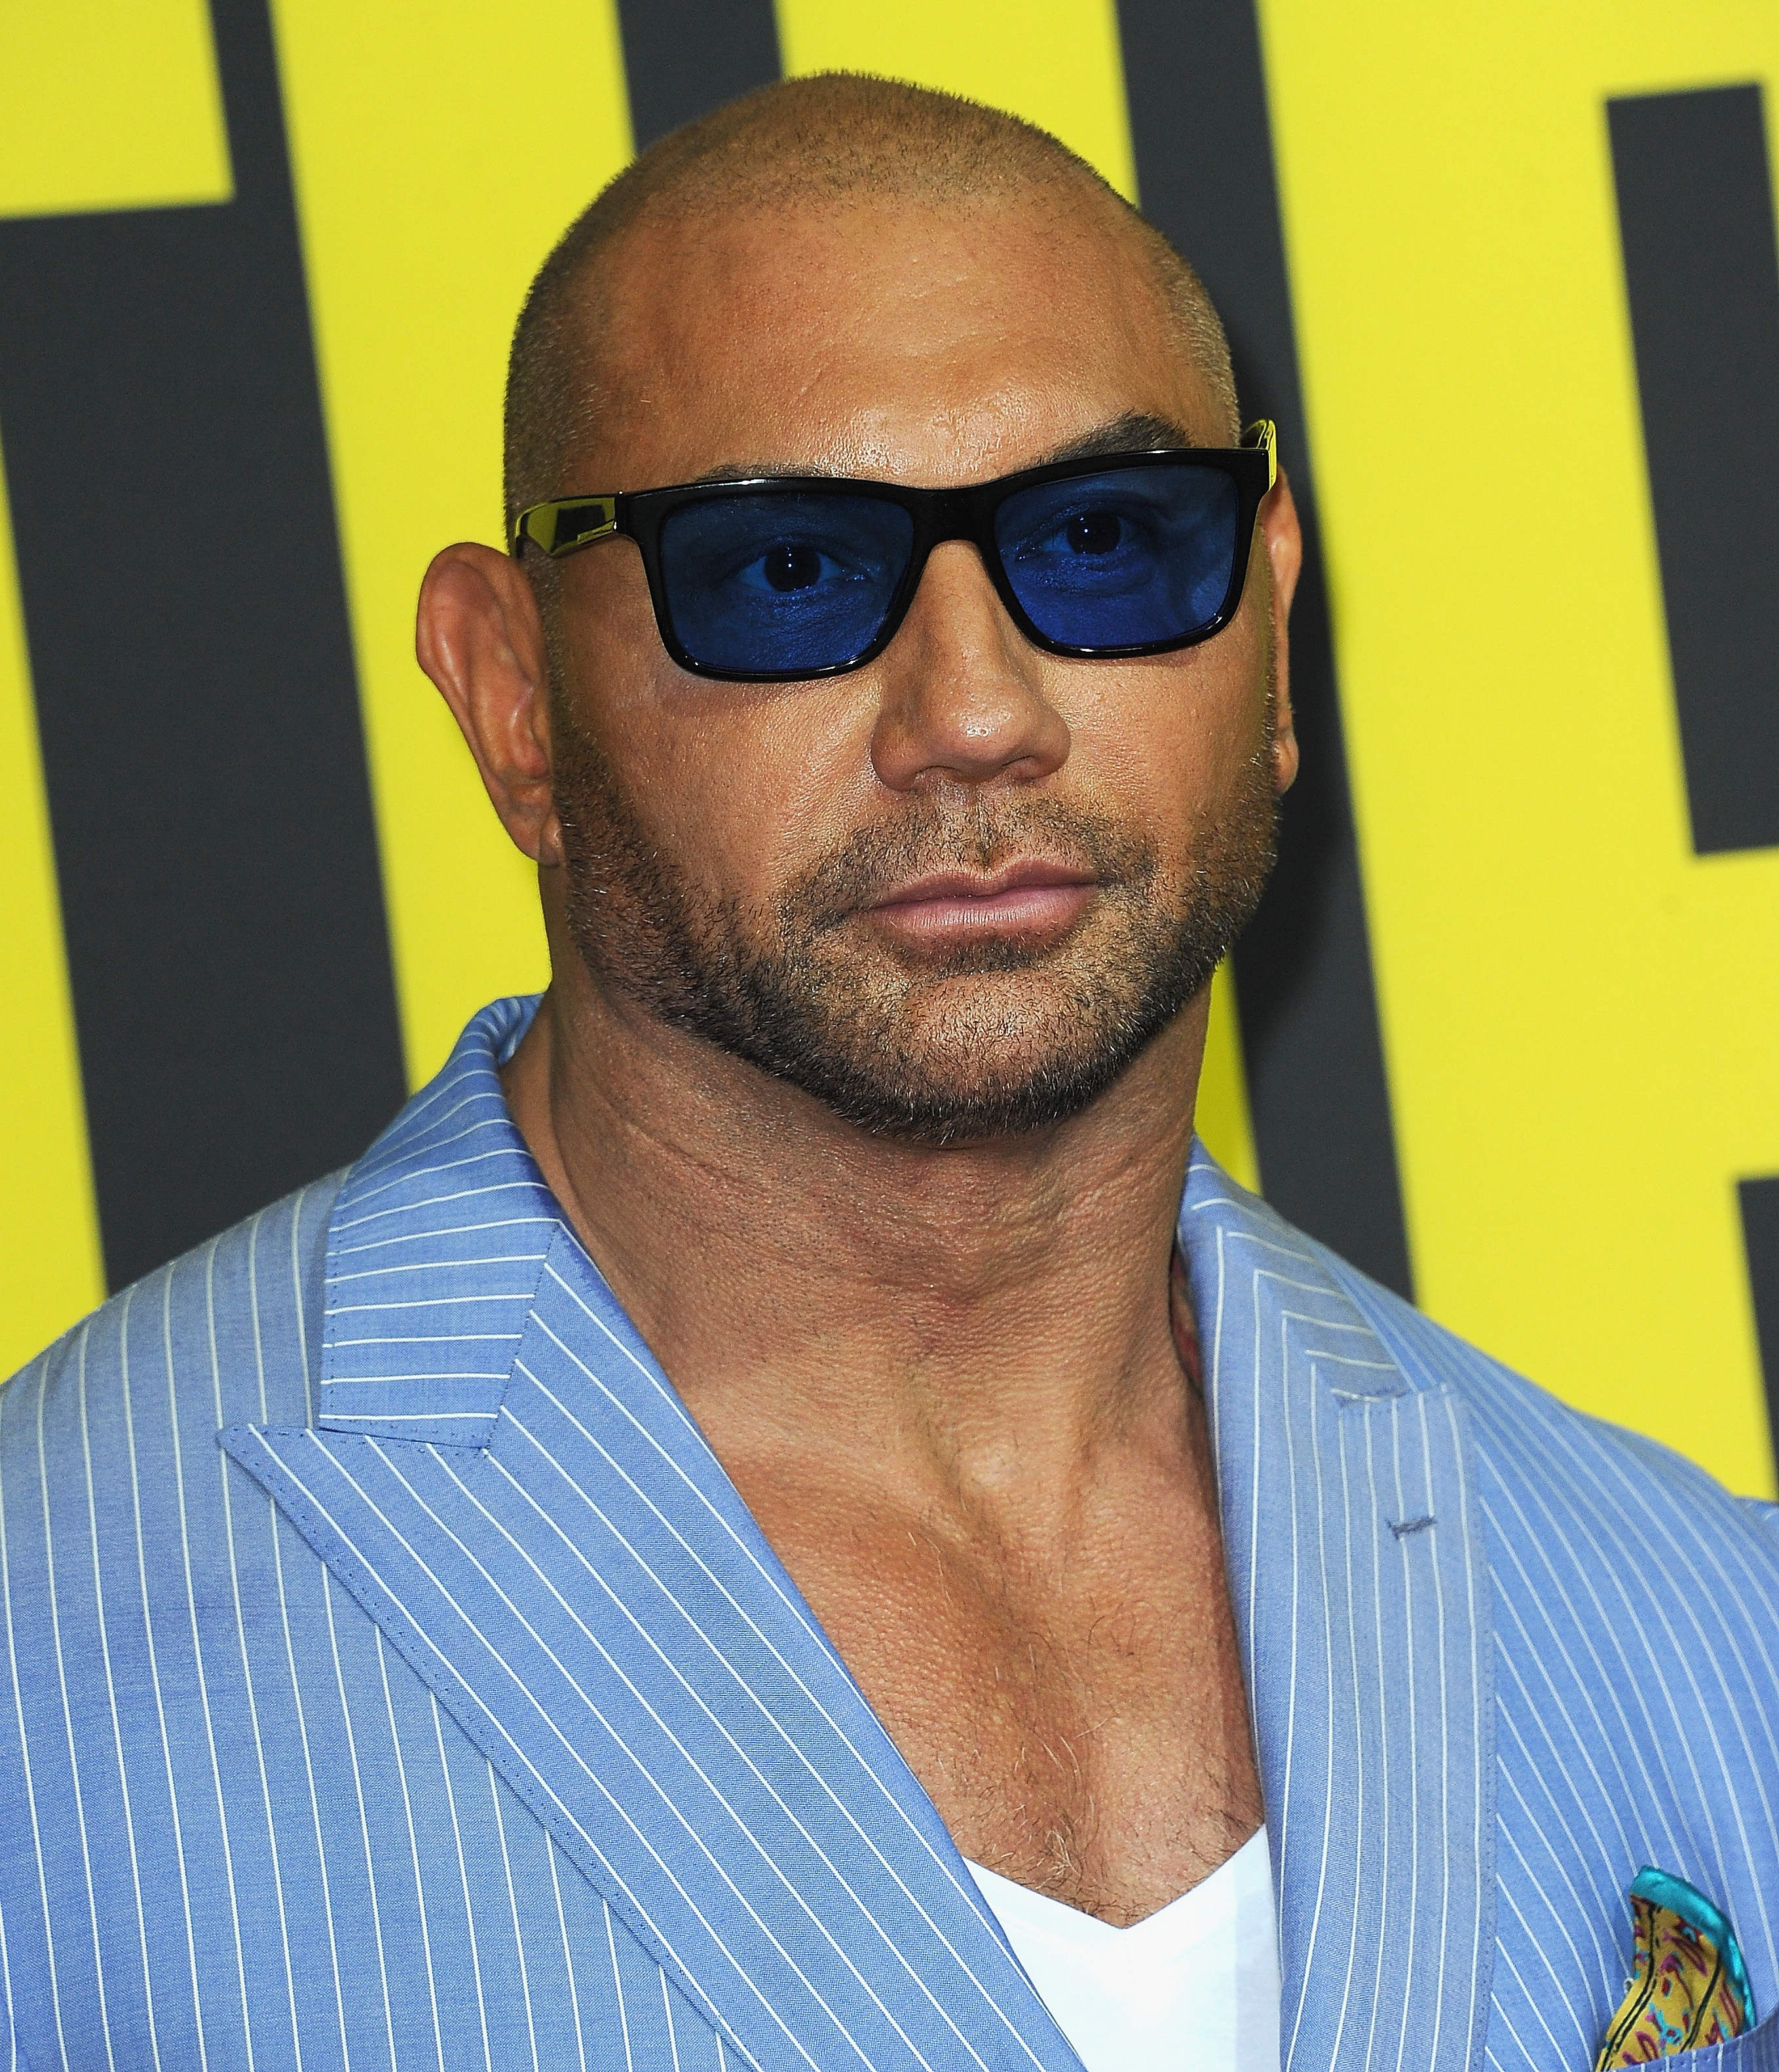 Dave Bautista arrives for the Premiere Of 20th Century Fox's "Stuber" held at Regal Cinemas L.A. Live on July 10, 2019, in Los Angeles, California. | Source: Getty Images